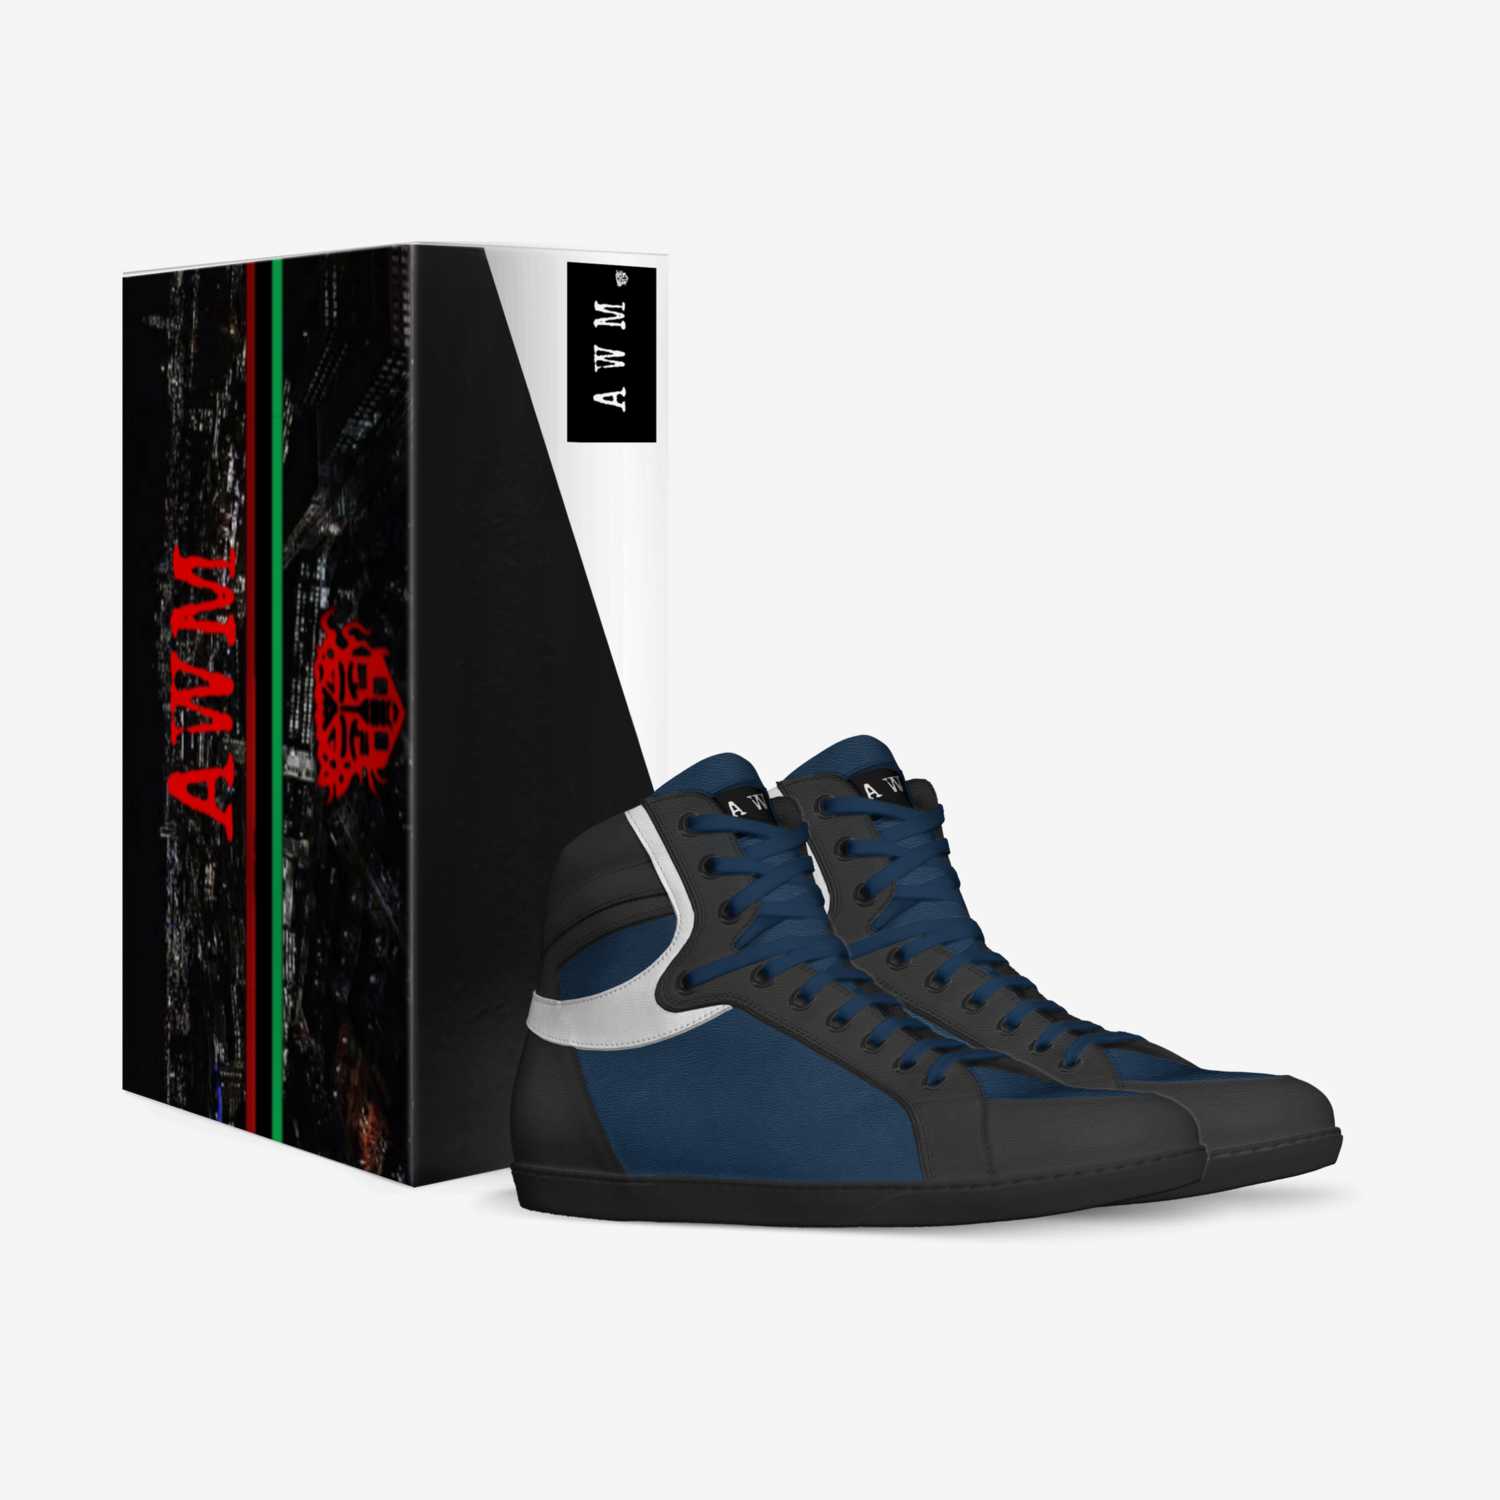 AWM custom made in Italy shoes by African War Mask | Box view